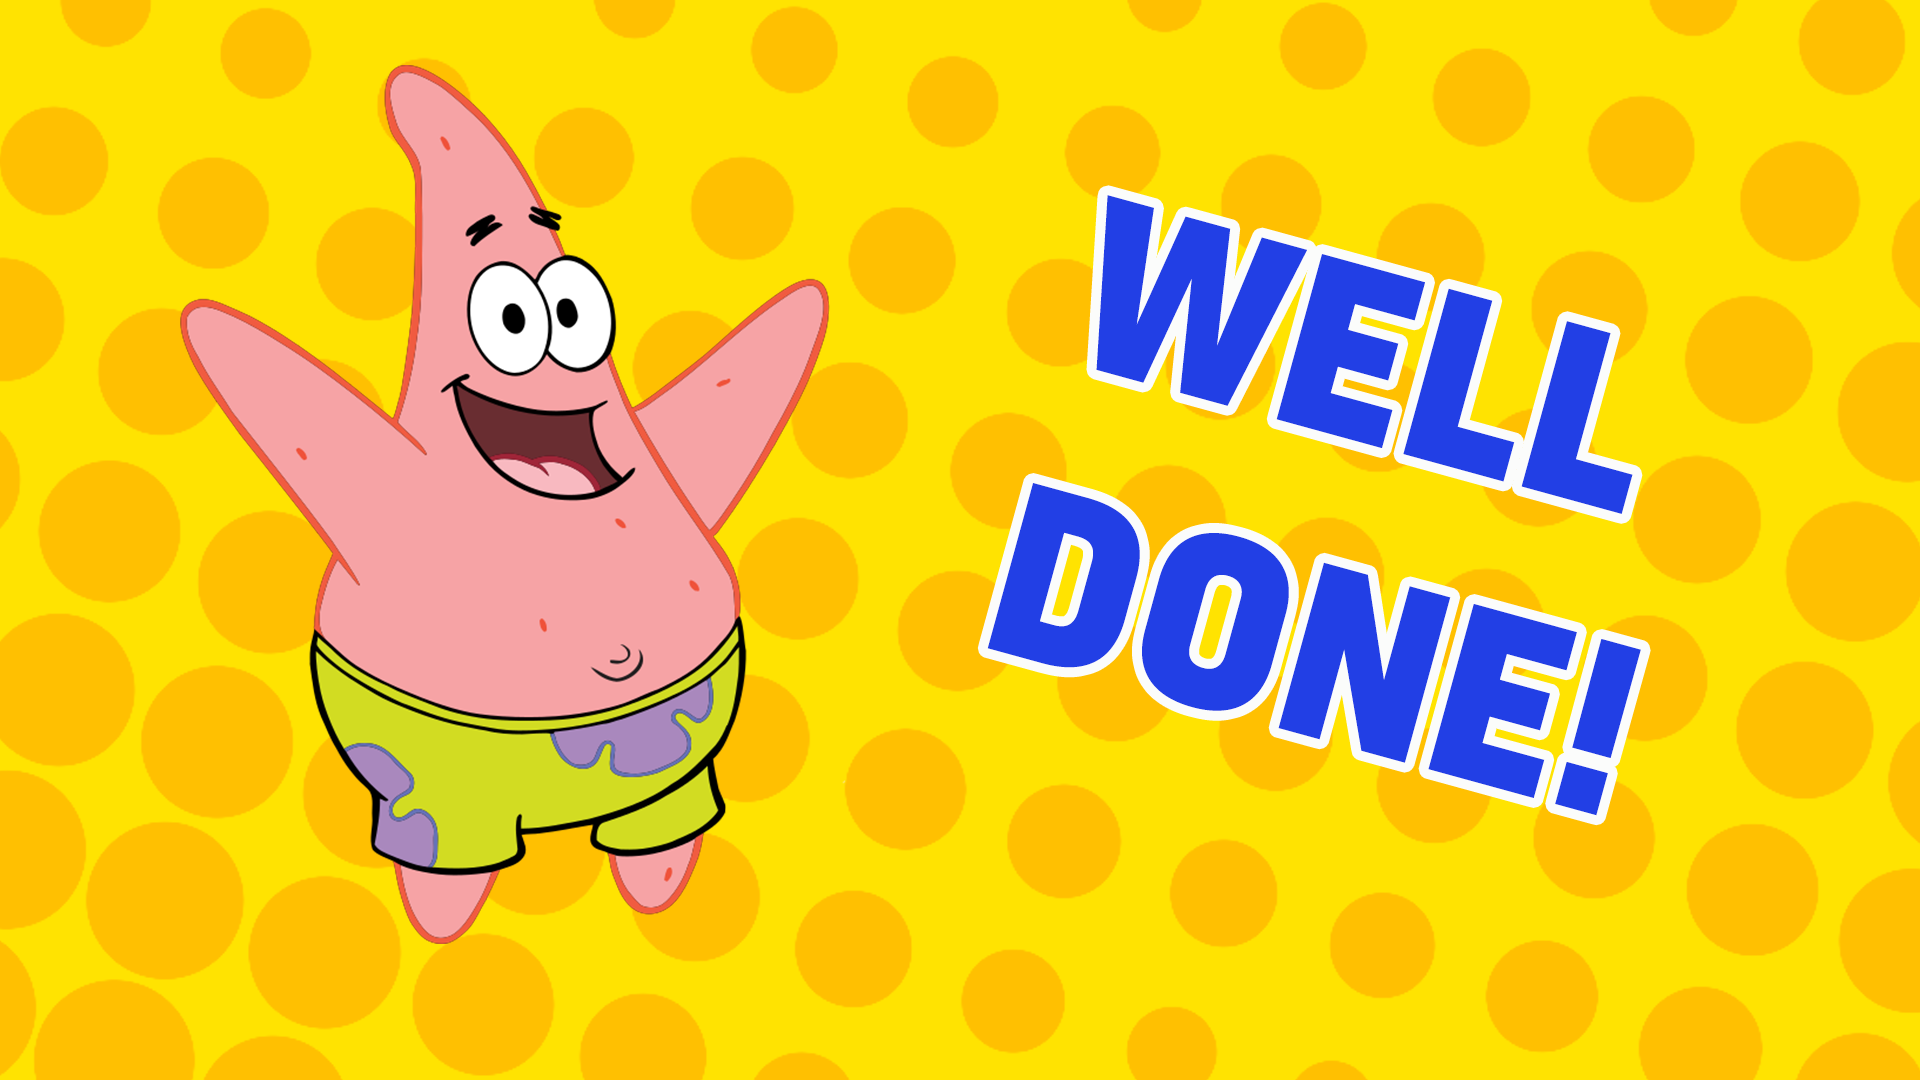 Good job! You must be a big SpongeBob fan! But can you get 100% next time? We believe in you!